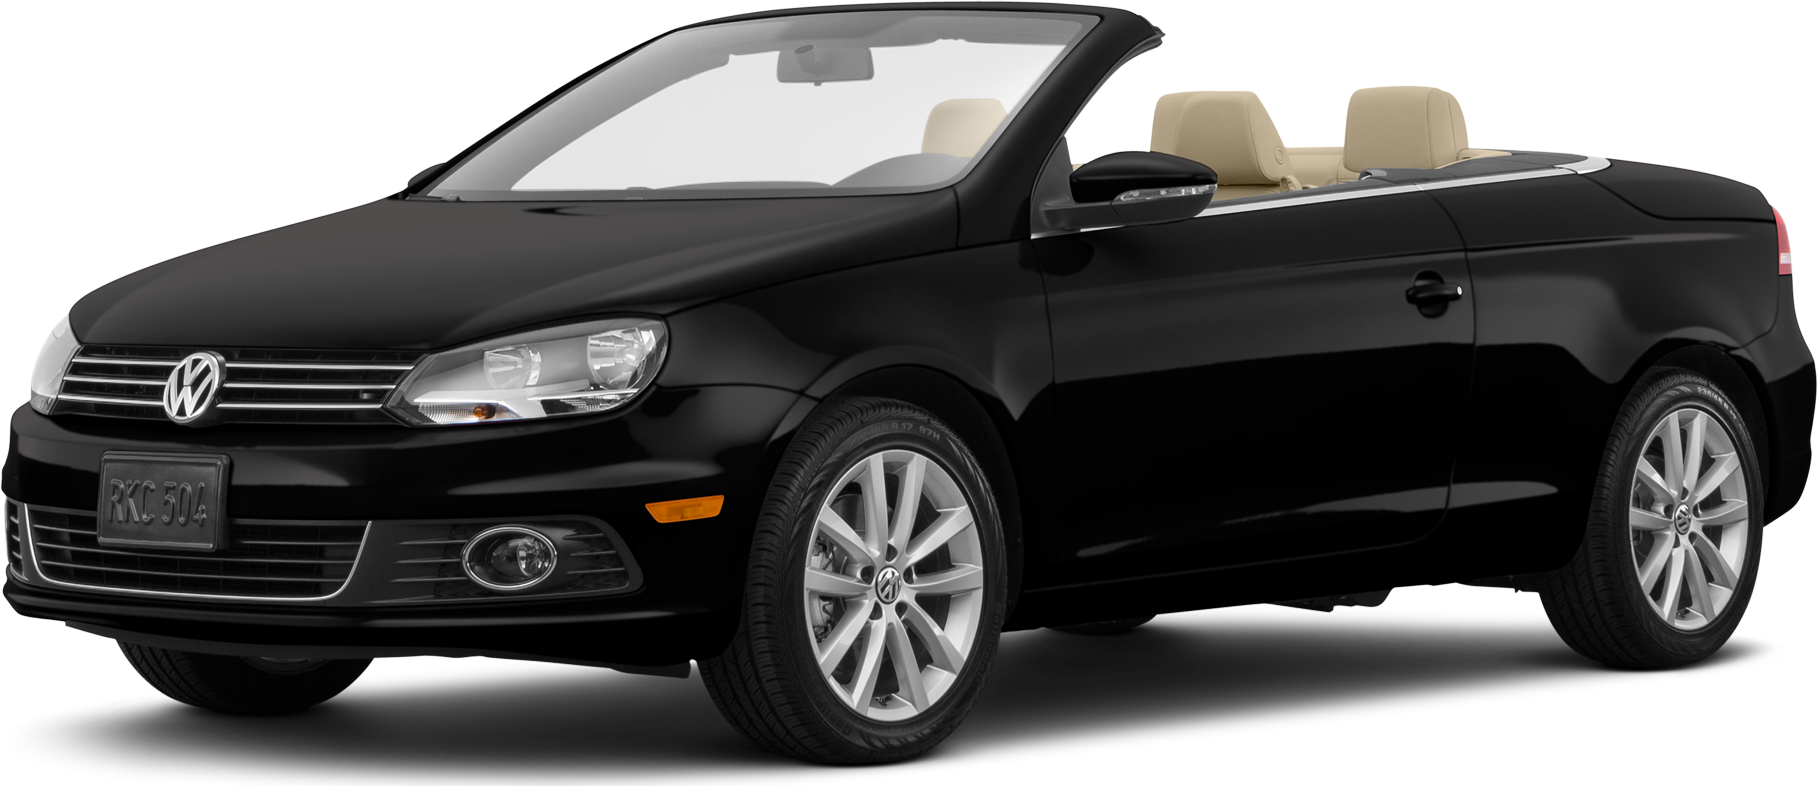 Used 2016 Volkswagen Eos for Sale Near Me - Pg. 4